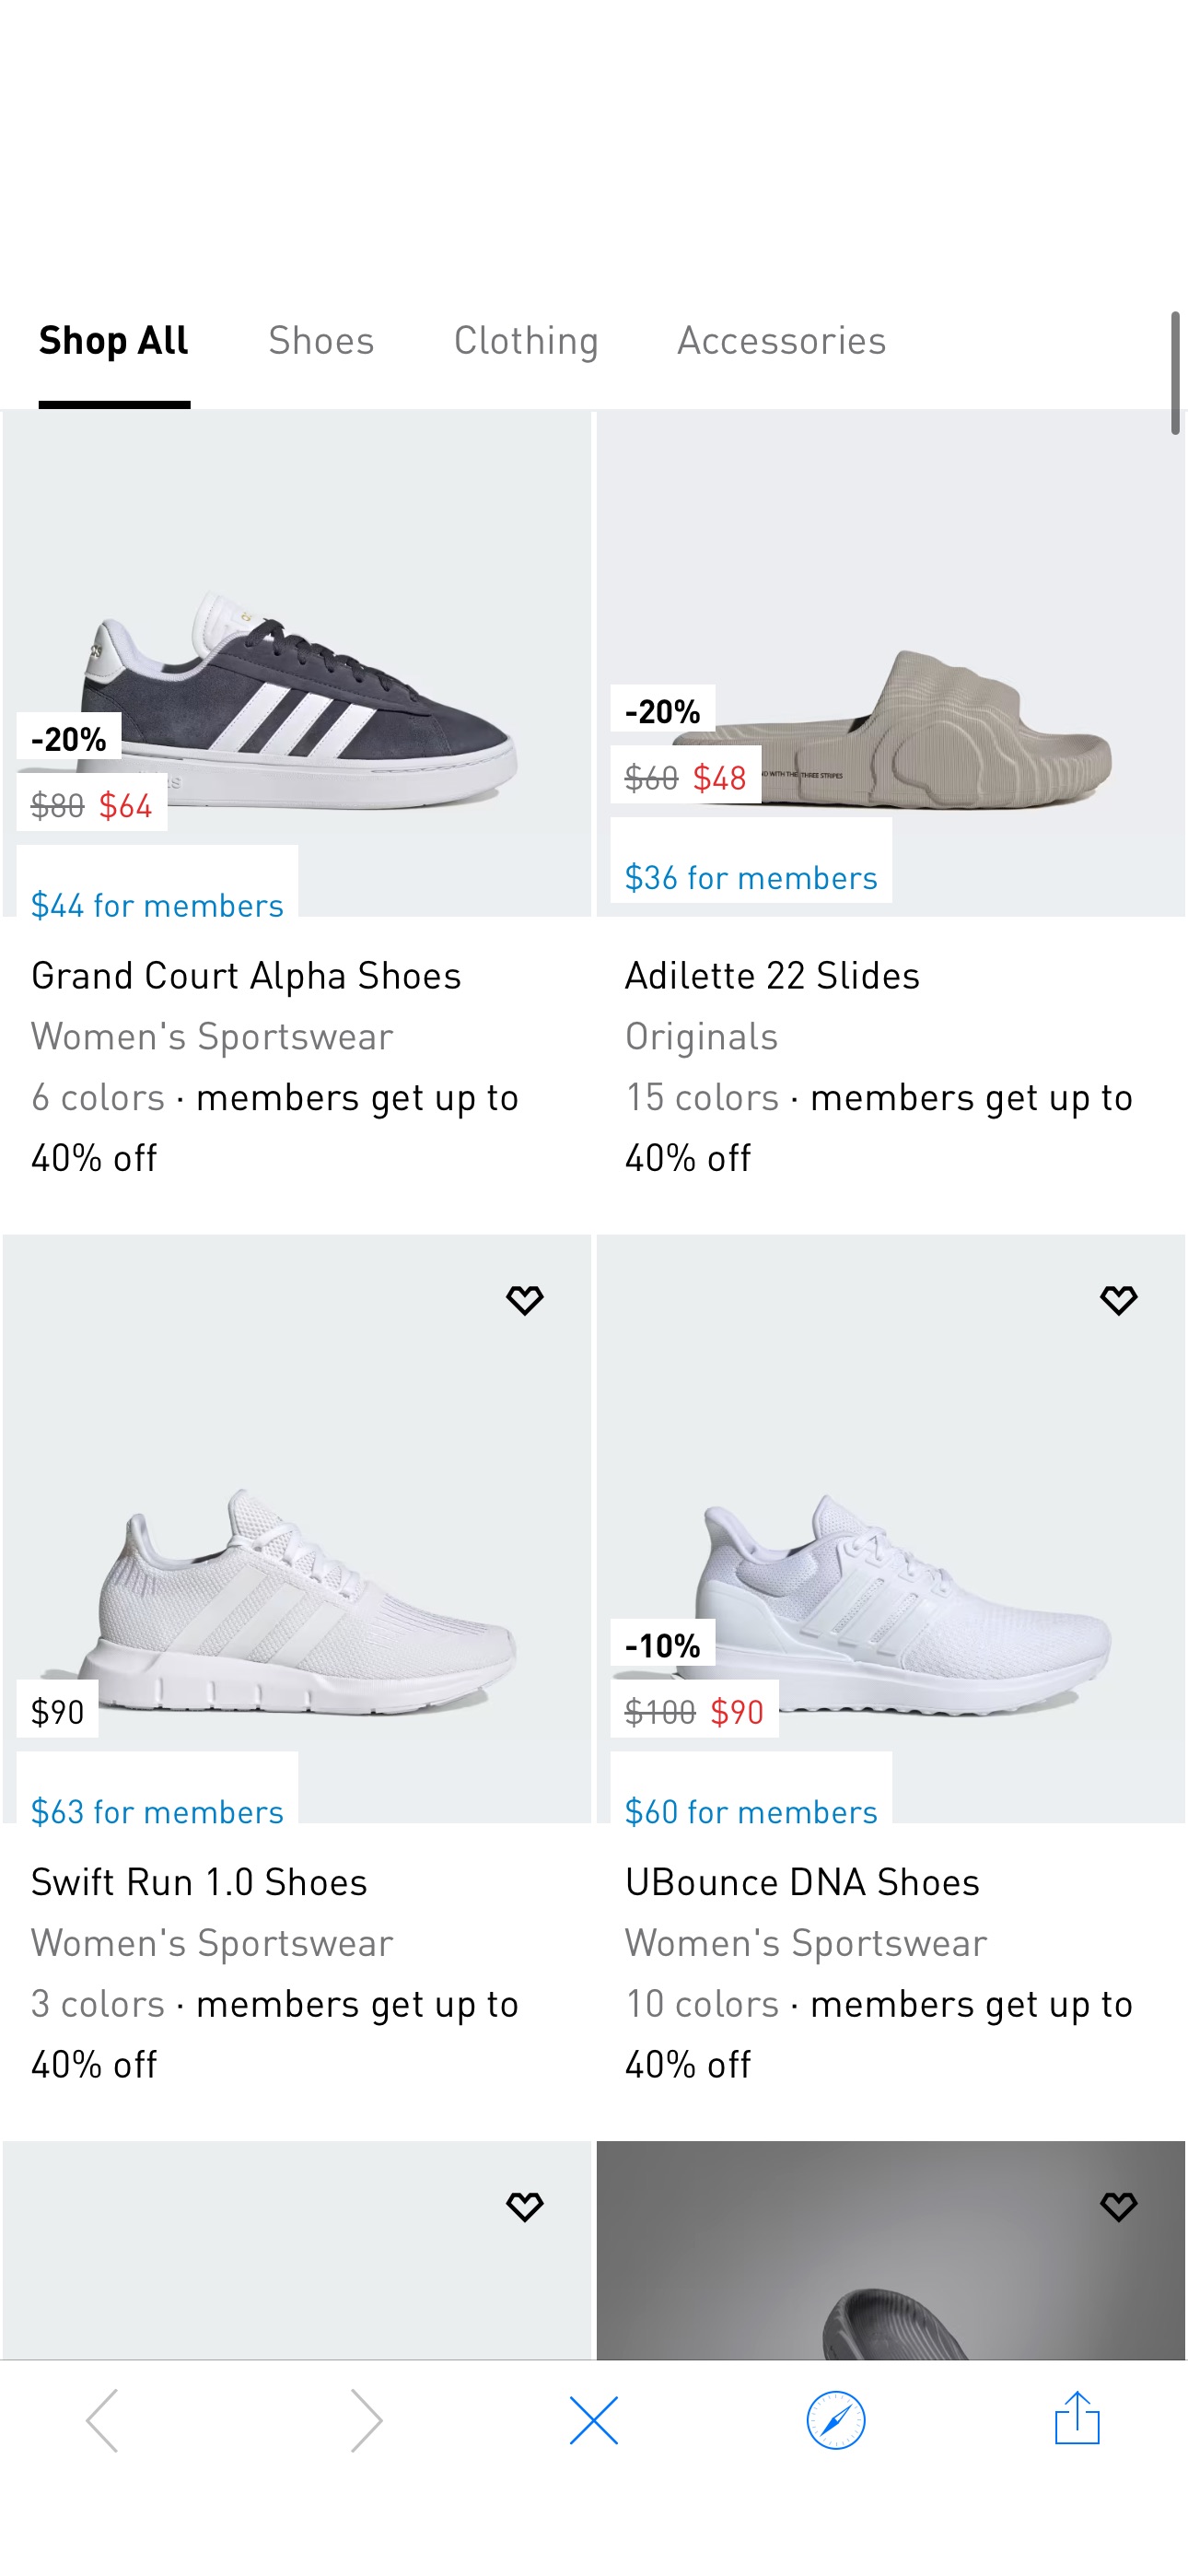 Shop Women's Shoes & Clothing Deals | adidas US Hot Adidas Sale
Up to 70% off + extra 40% off at checkout + 15% off with code: OFF15 (log in)